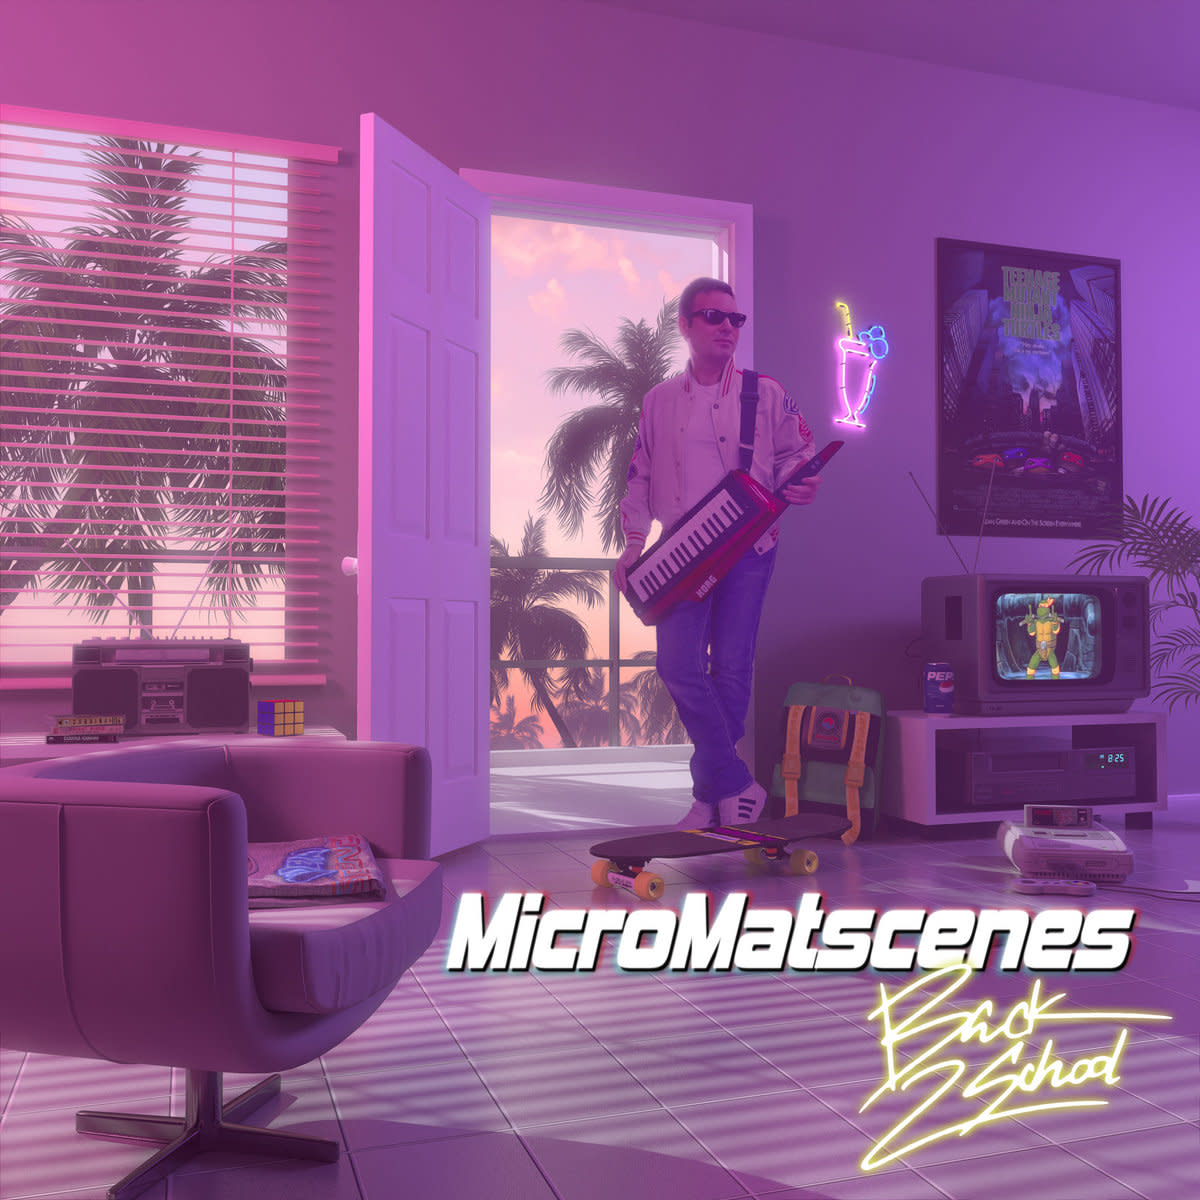 synth-album-review-back-2-school-by-micromatscenes